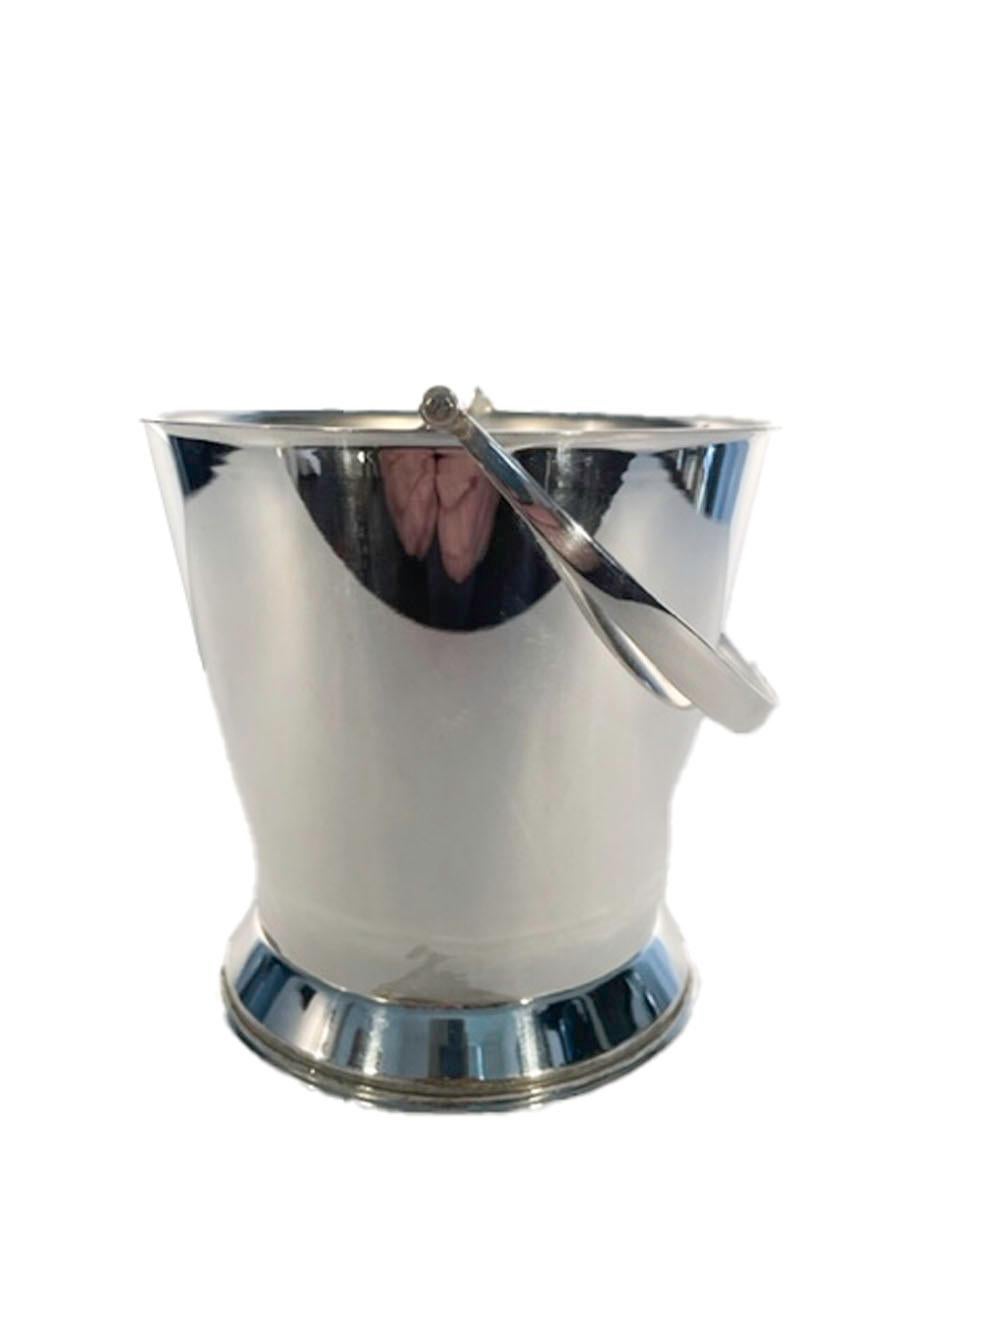 English Art Deco Silver Plate Ice Bucket of Pail Form with Strainer by Yeoman